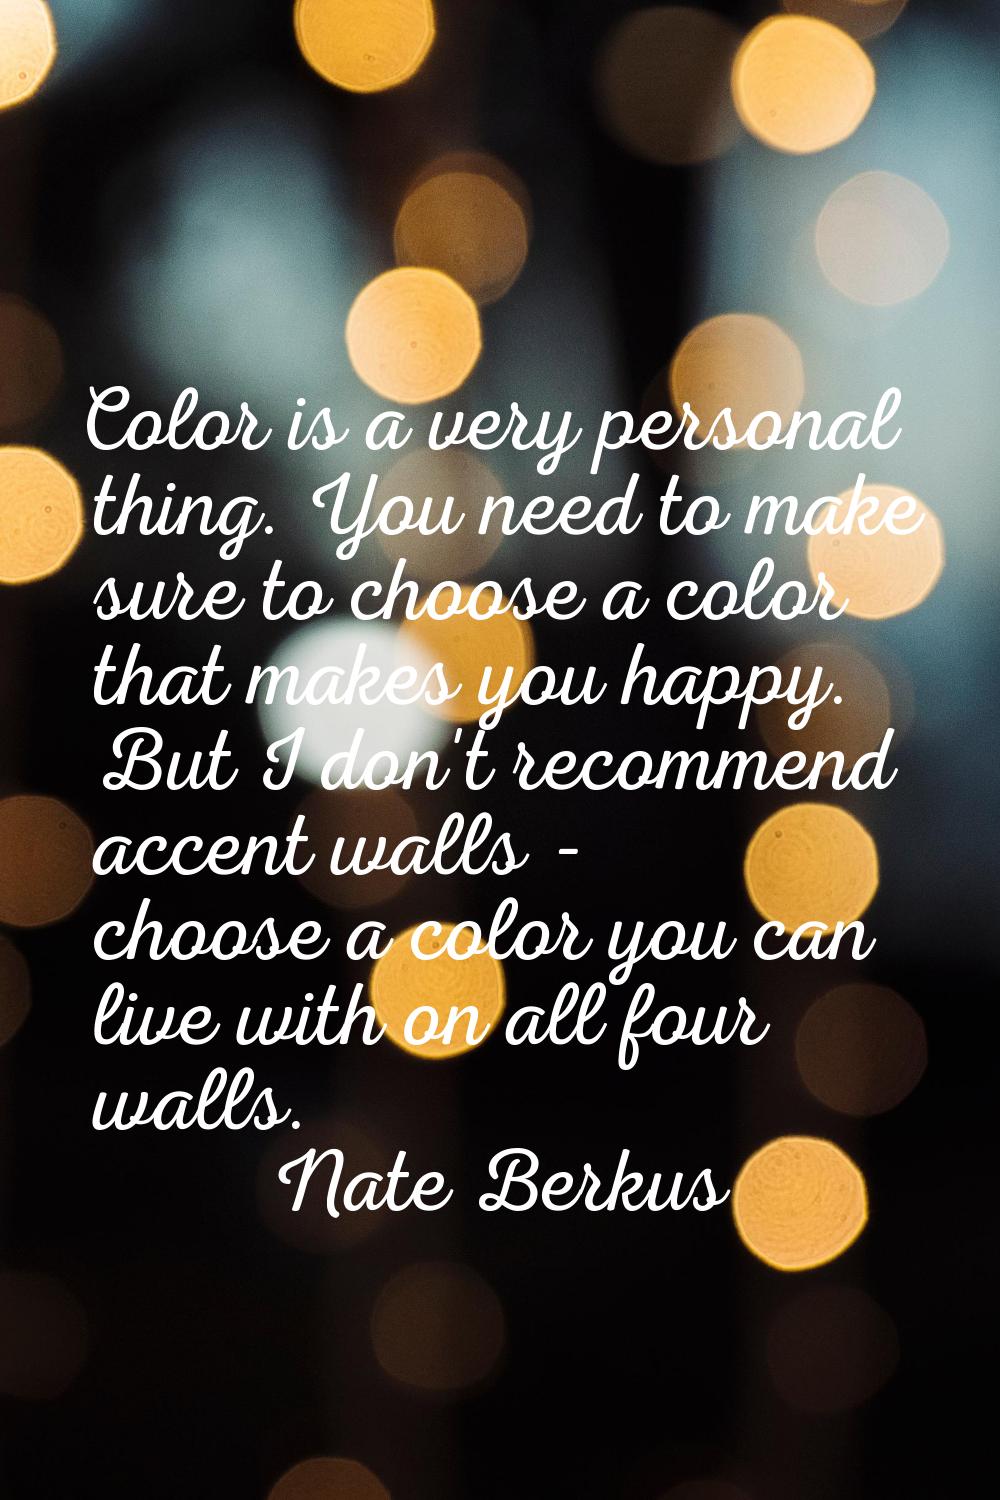 Color is a very personal thing. You need to make sure to choose a color that makes you happy. But I